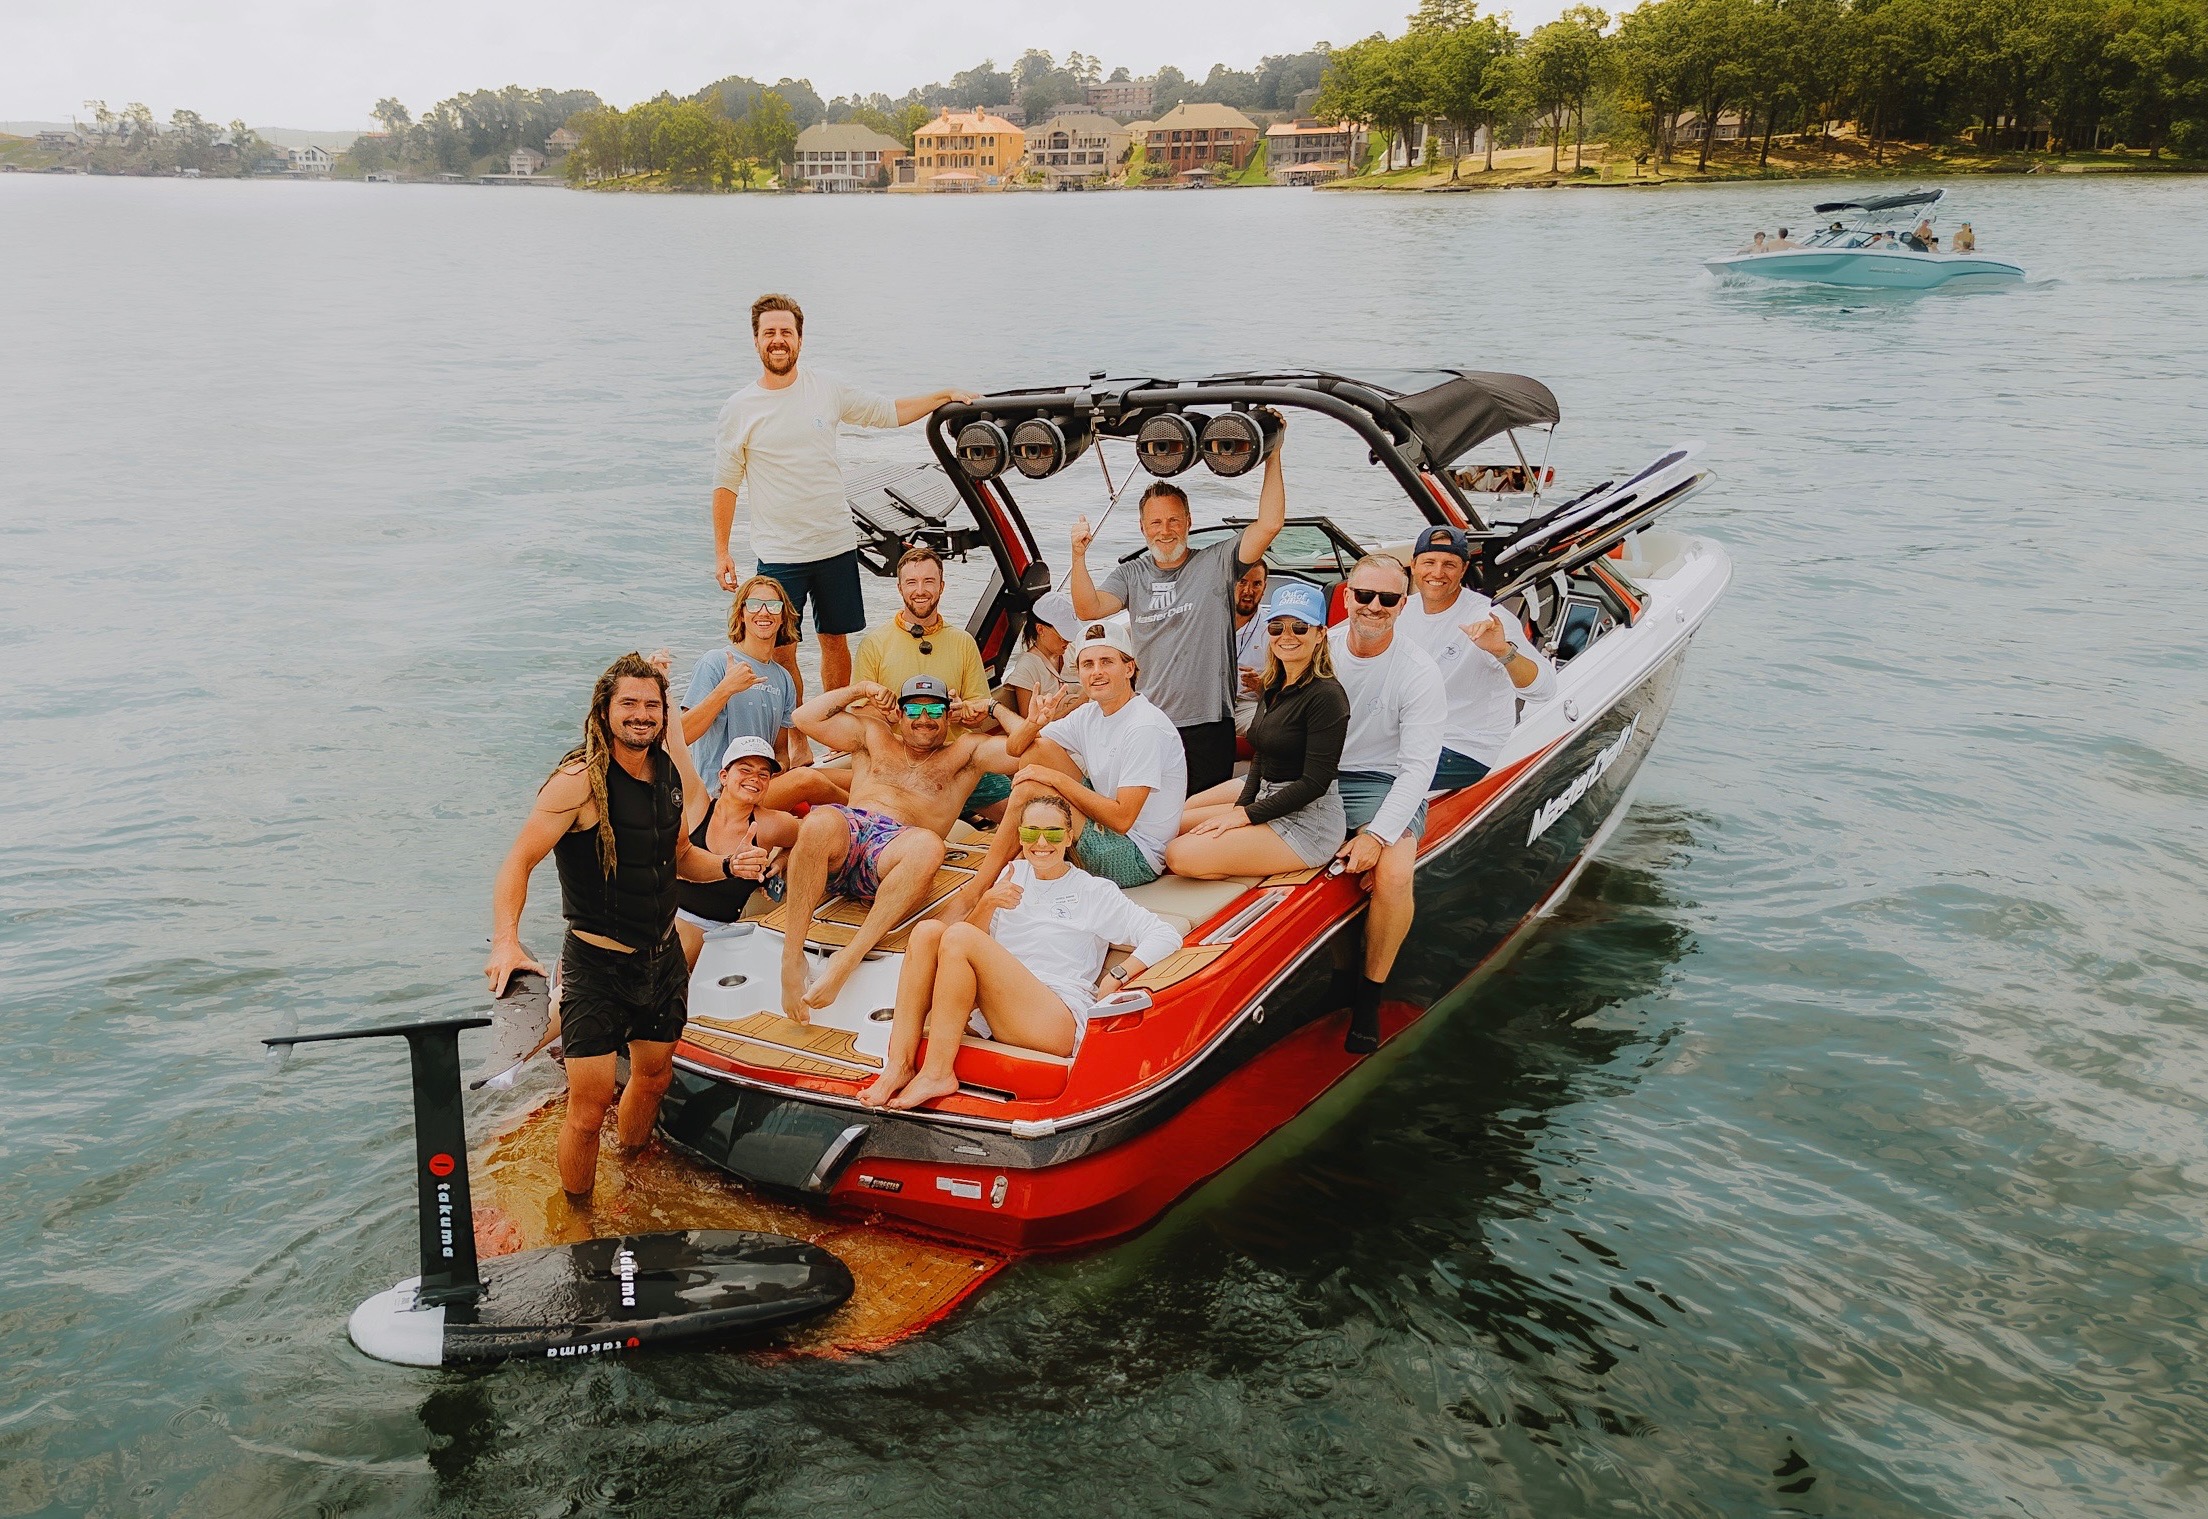 MasterCraft Rule the Water Tour